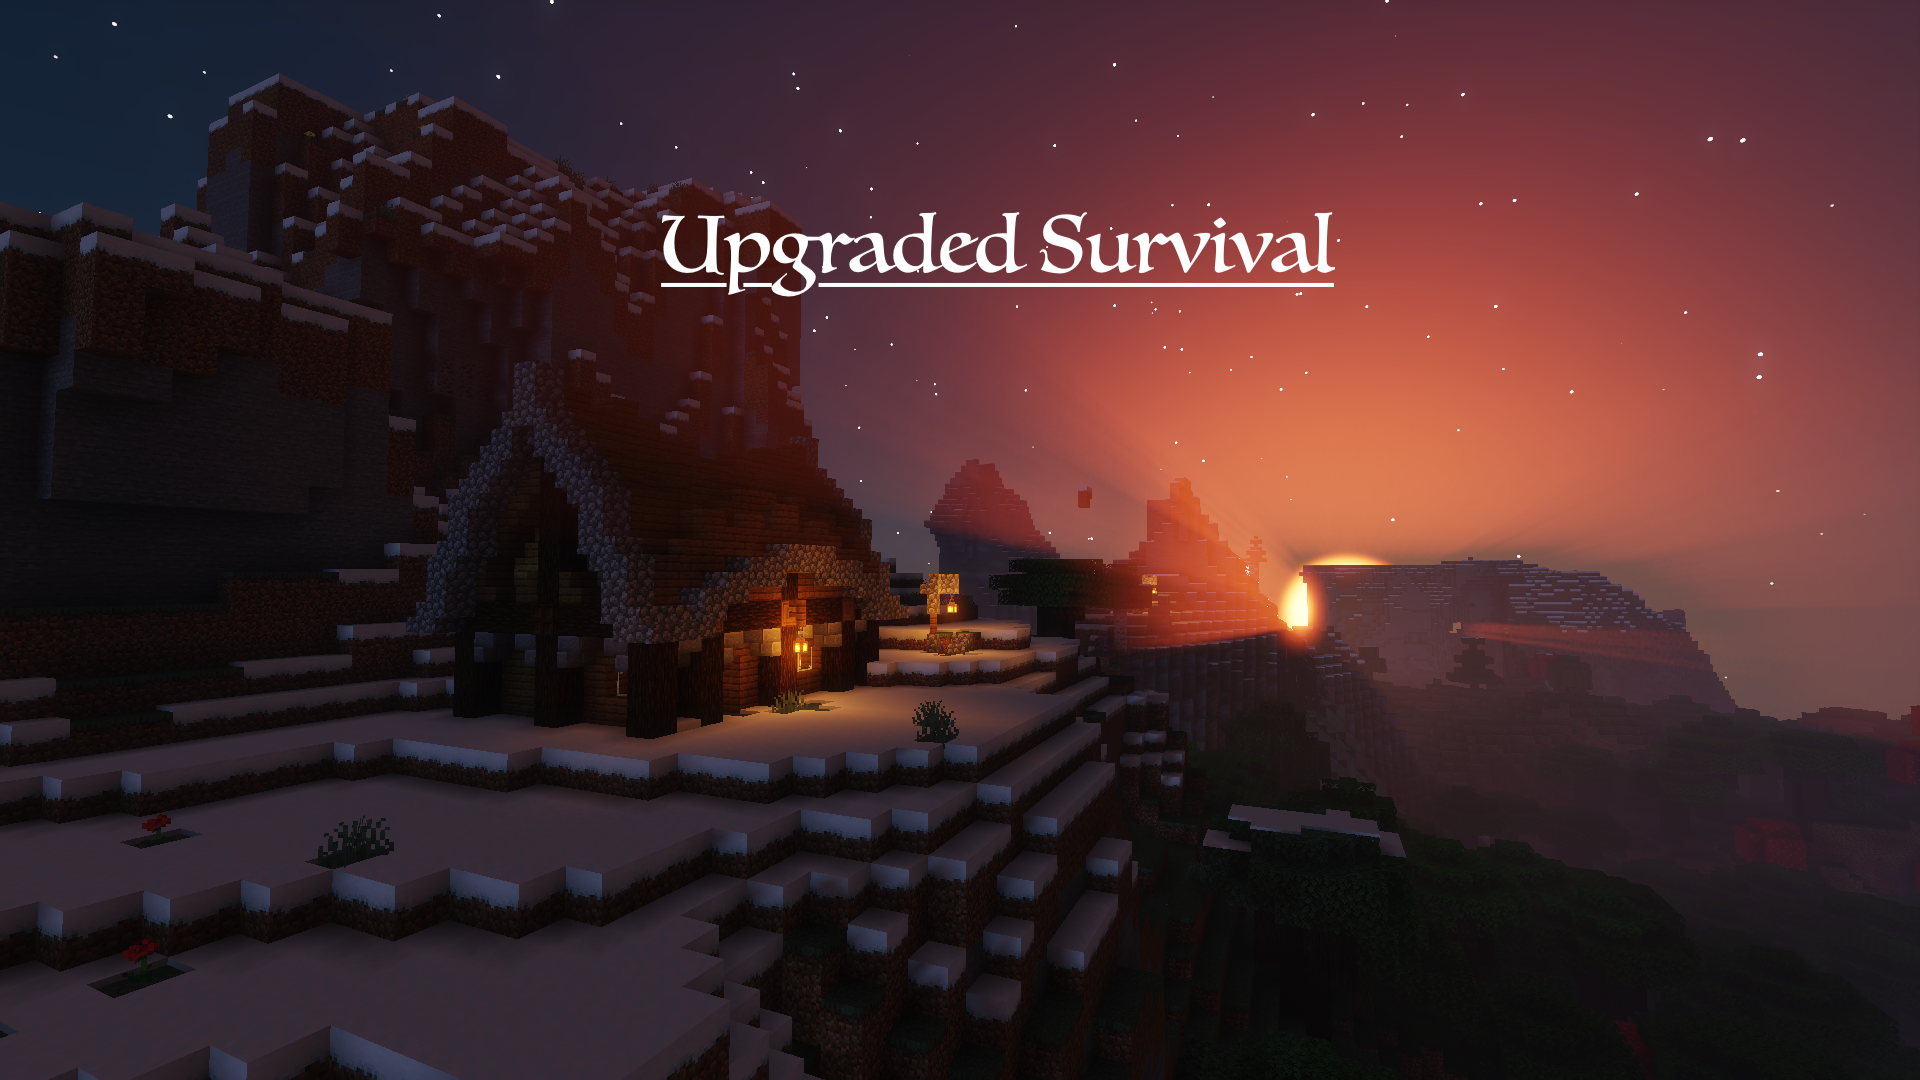 Download Upgraded Survival for Minecraft 1.16.1